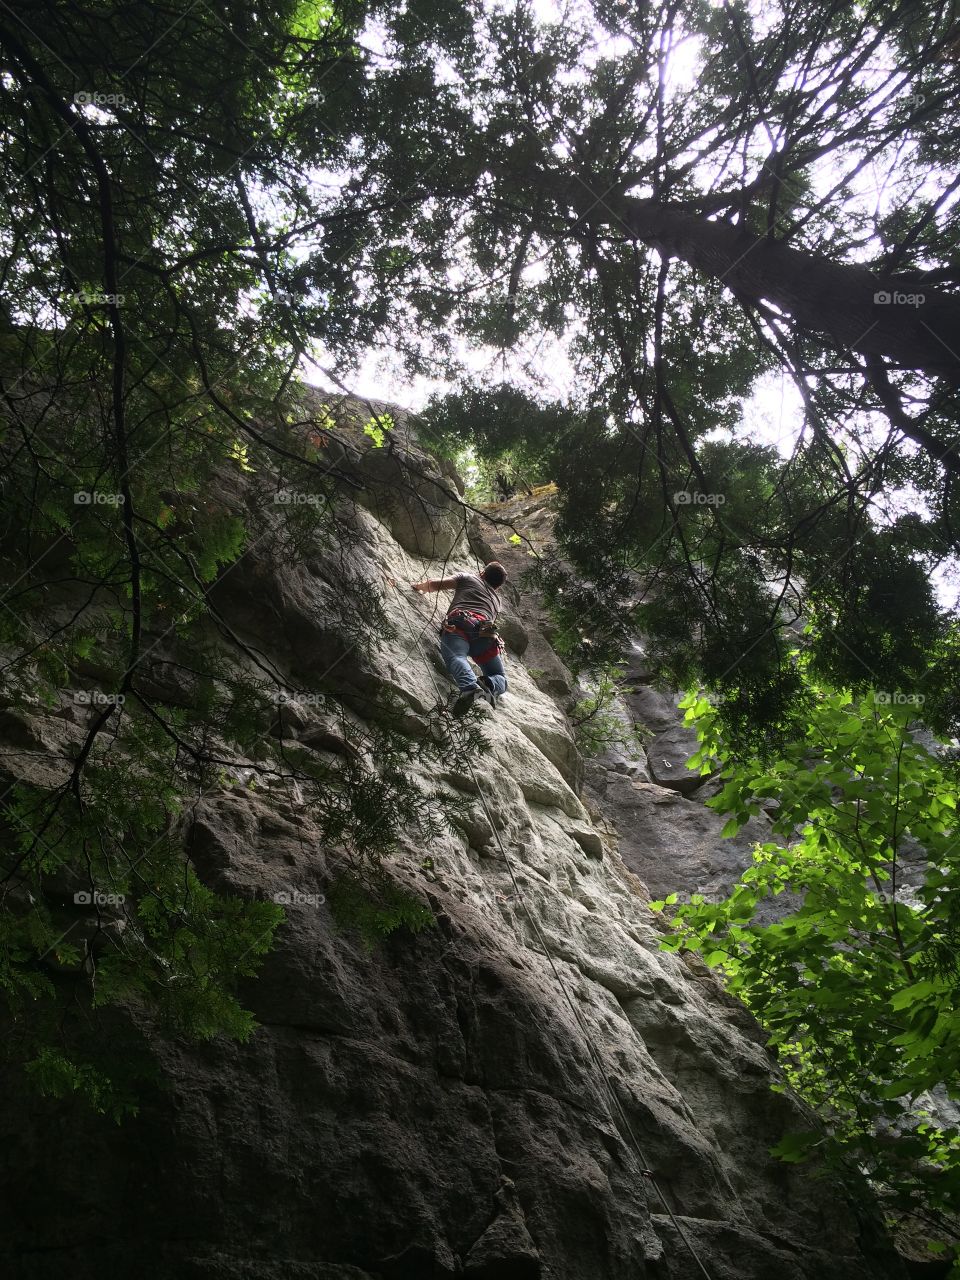 Climbing a 5.11 in the swamp